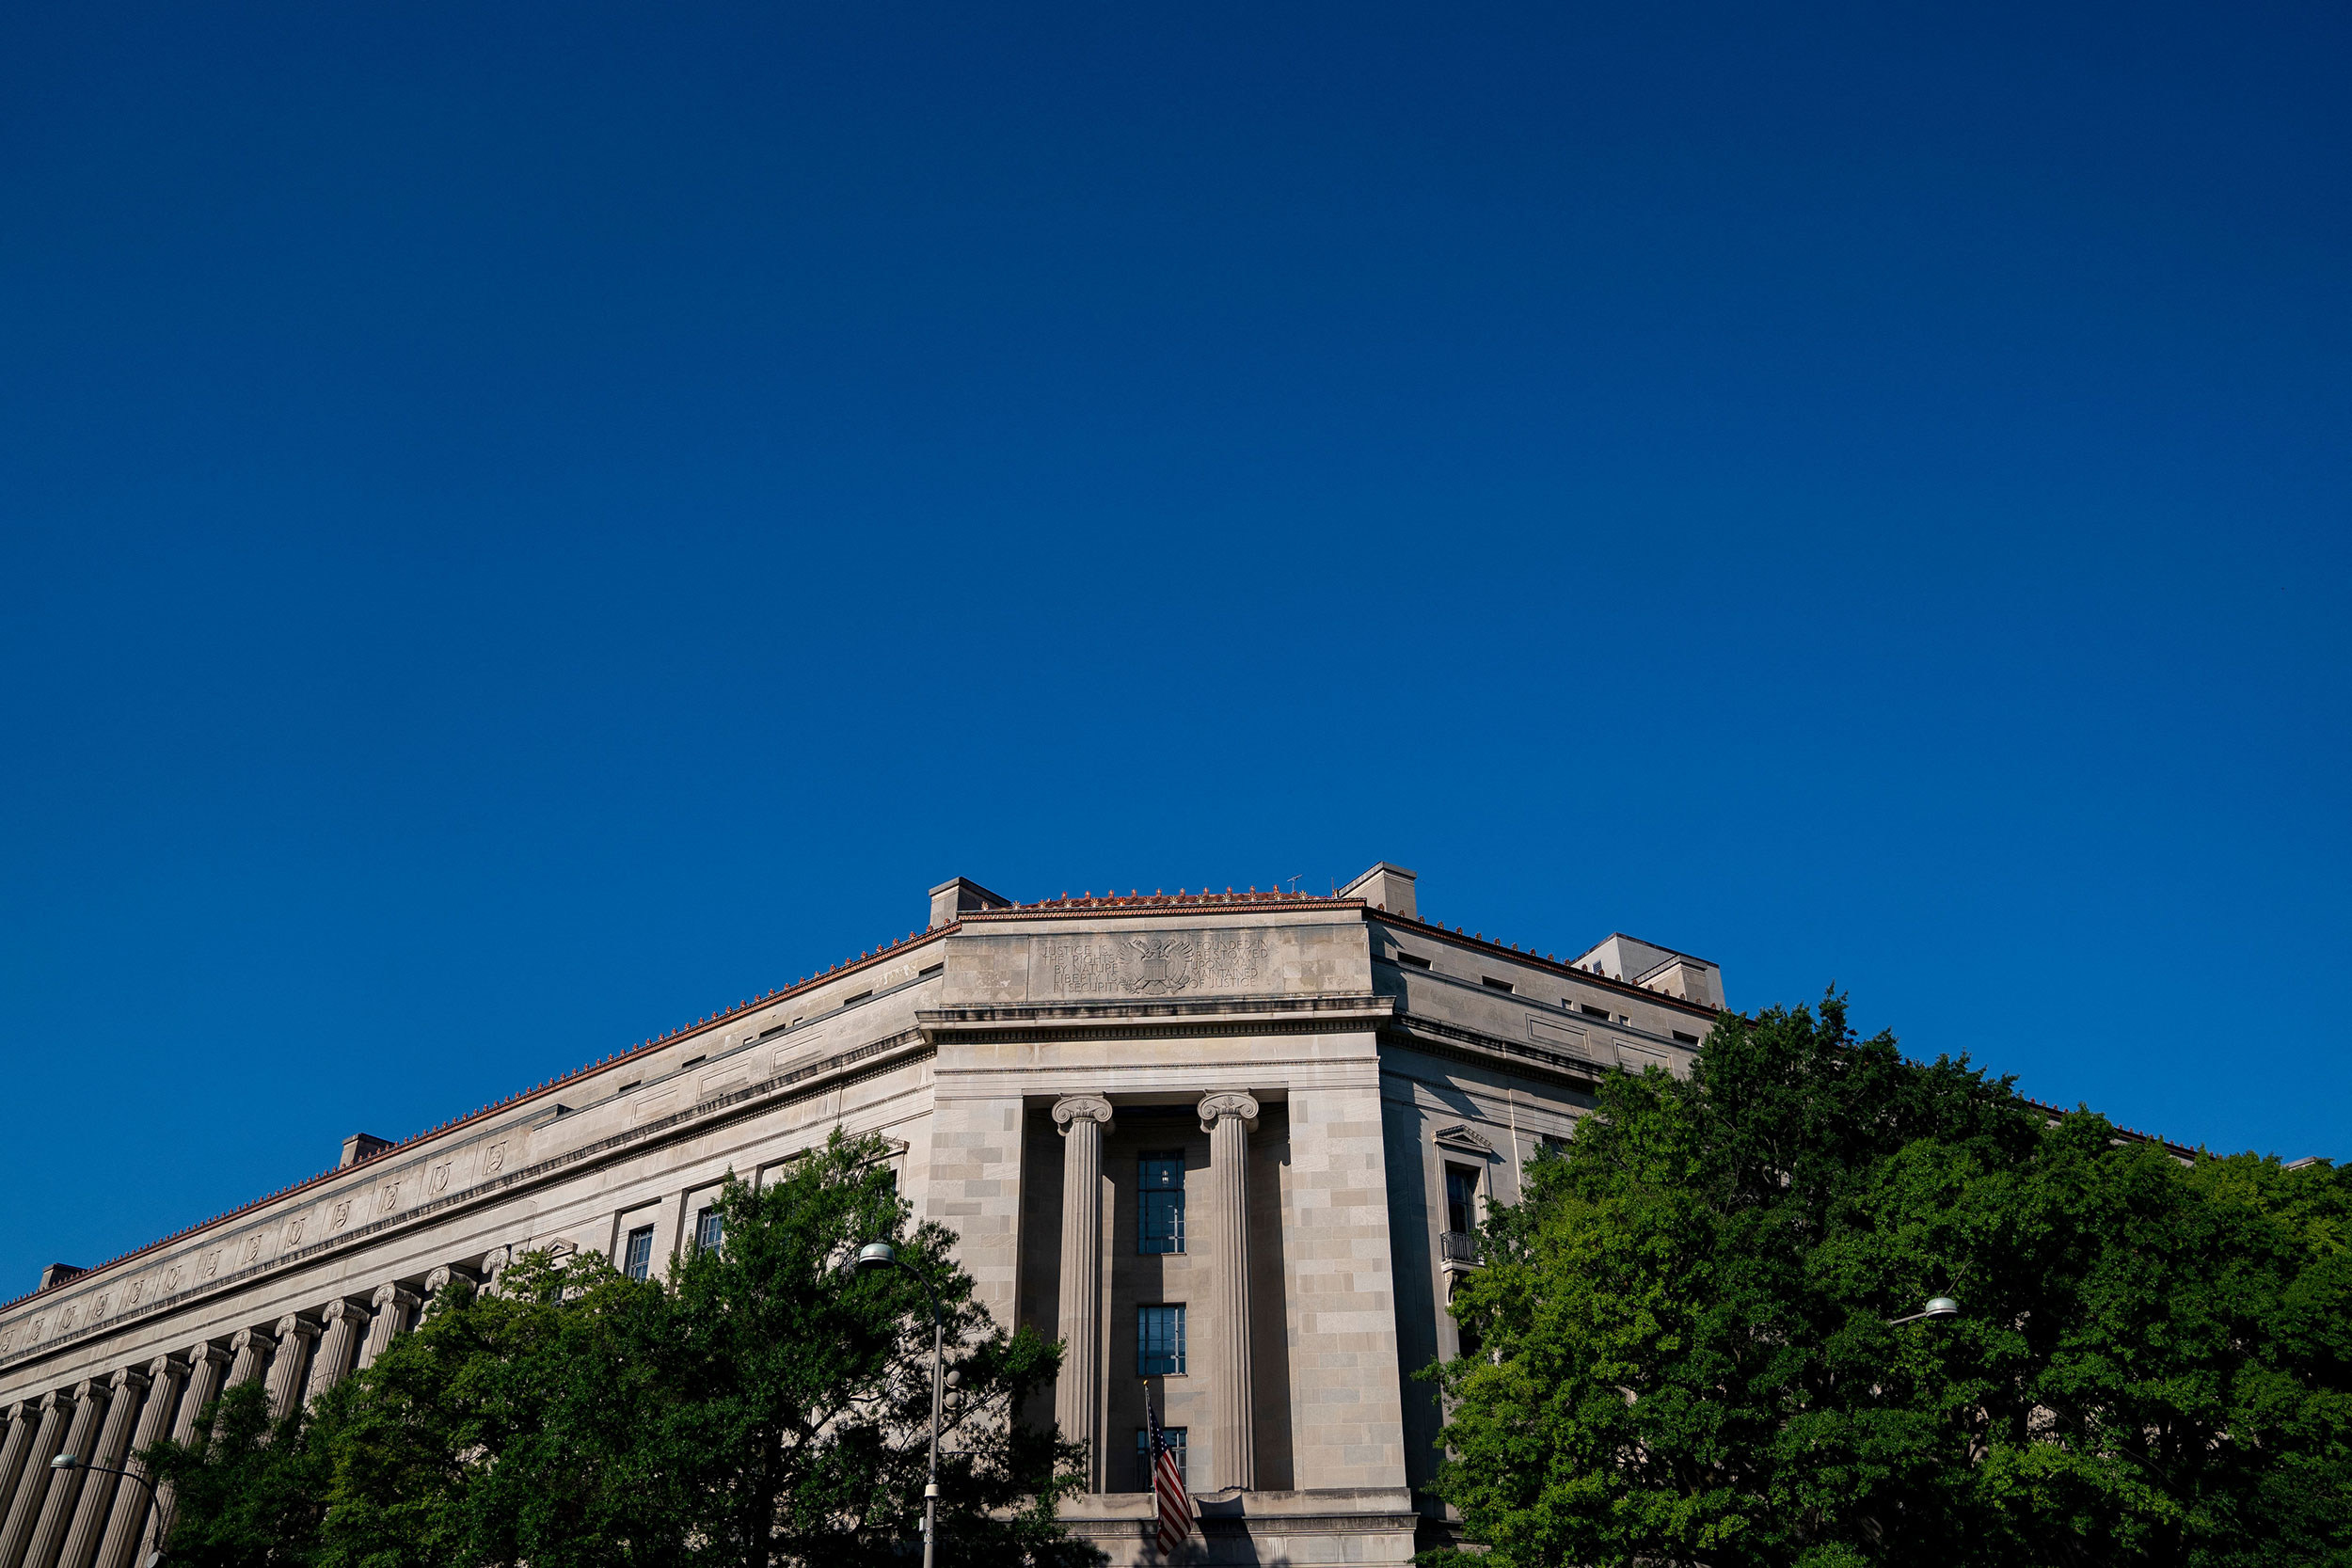 The Department of Justice building is seen in Washington, DC, on August 9, 2022. (Photo by Stefani ...